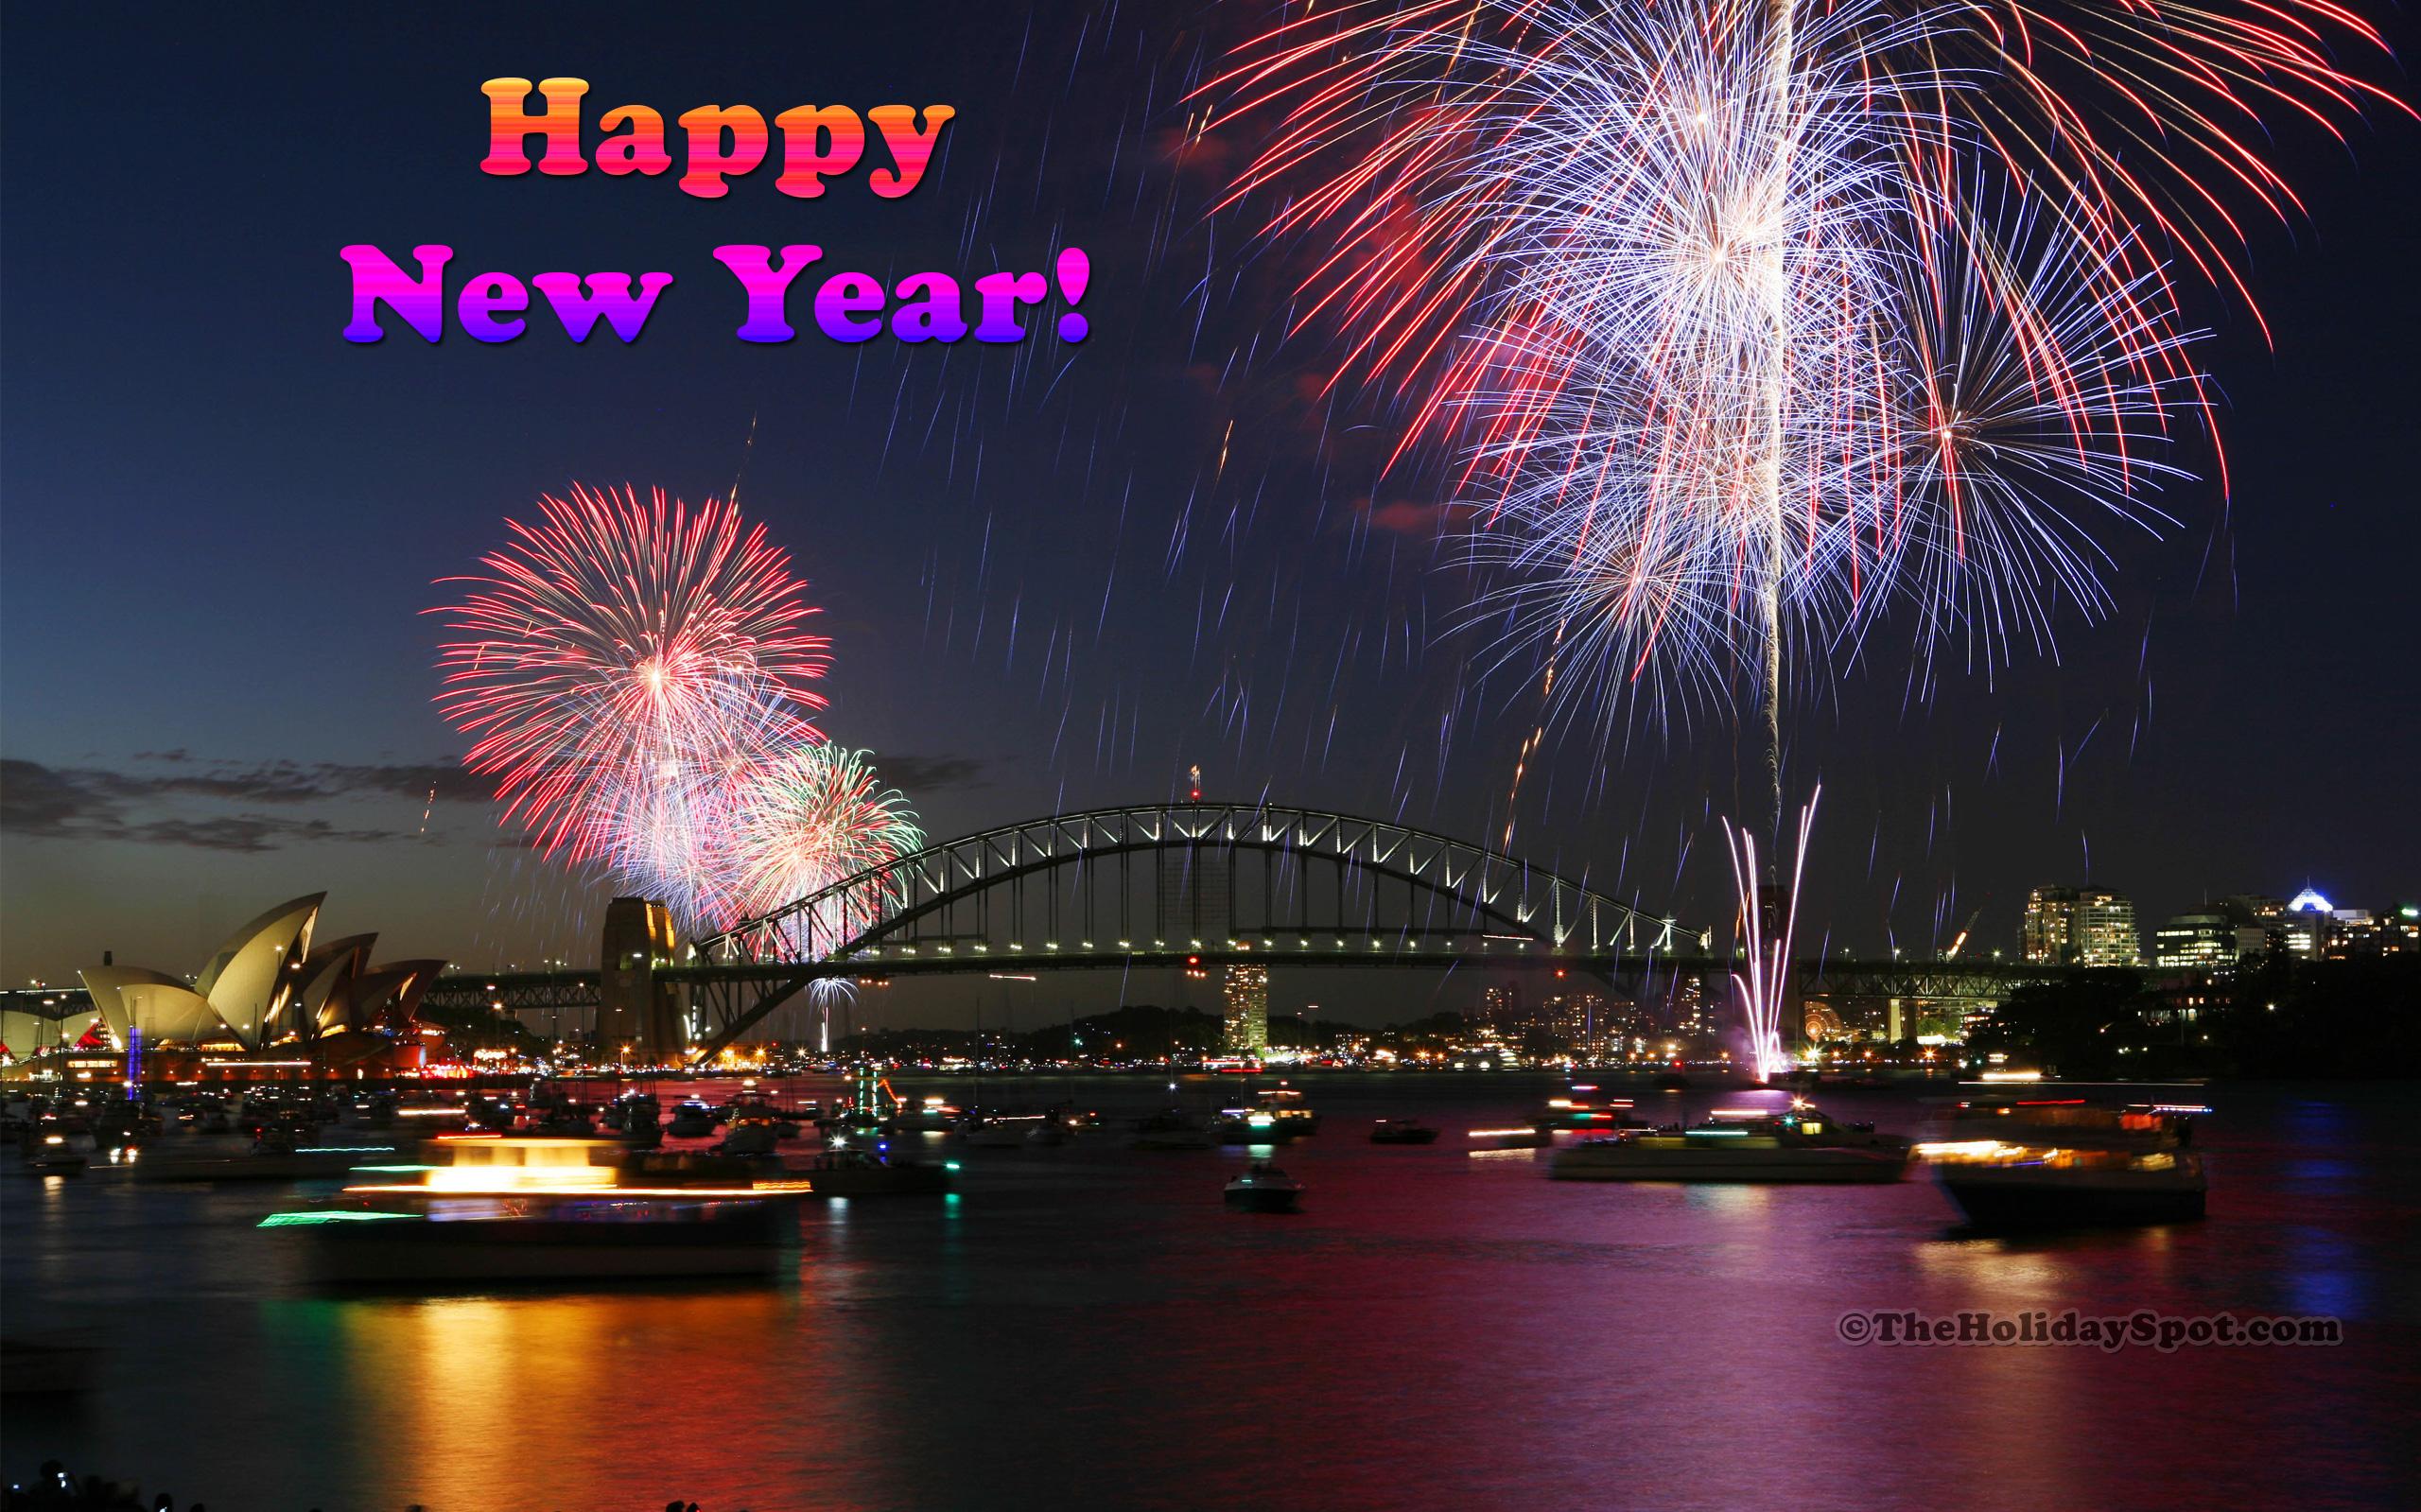 Happy New Year HD Wallpaper Image And Background